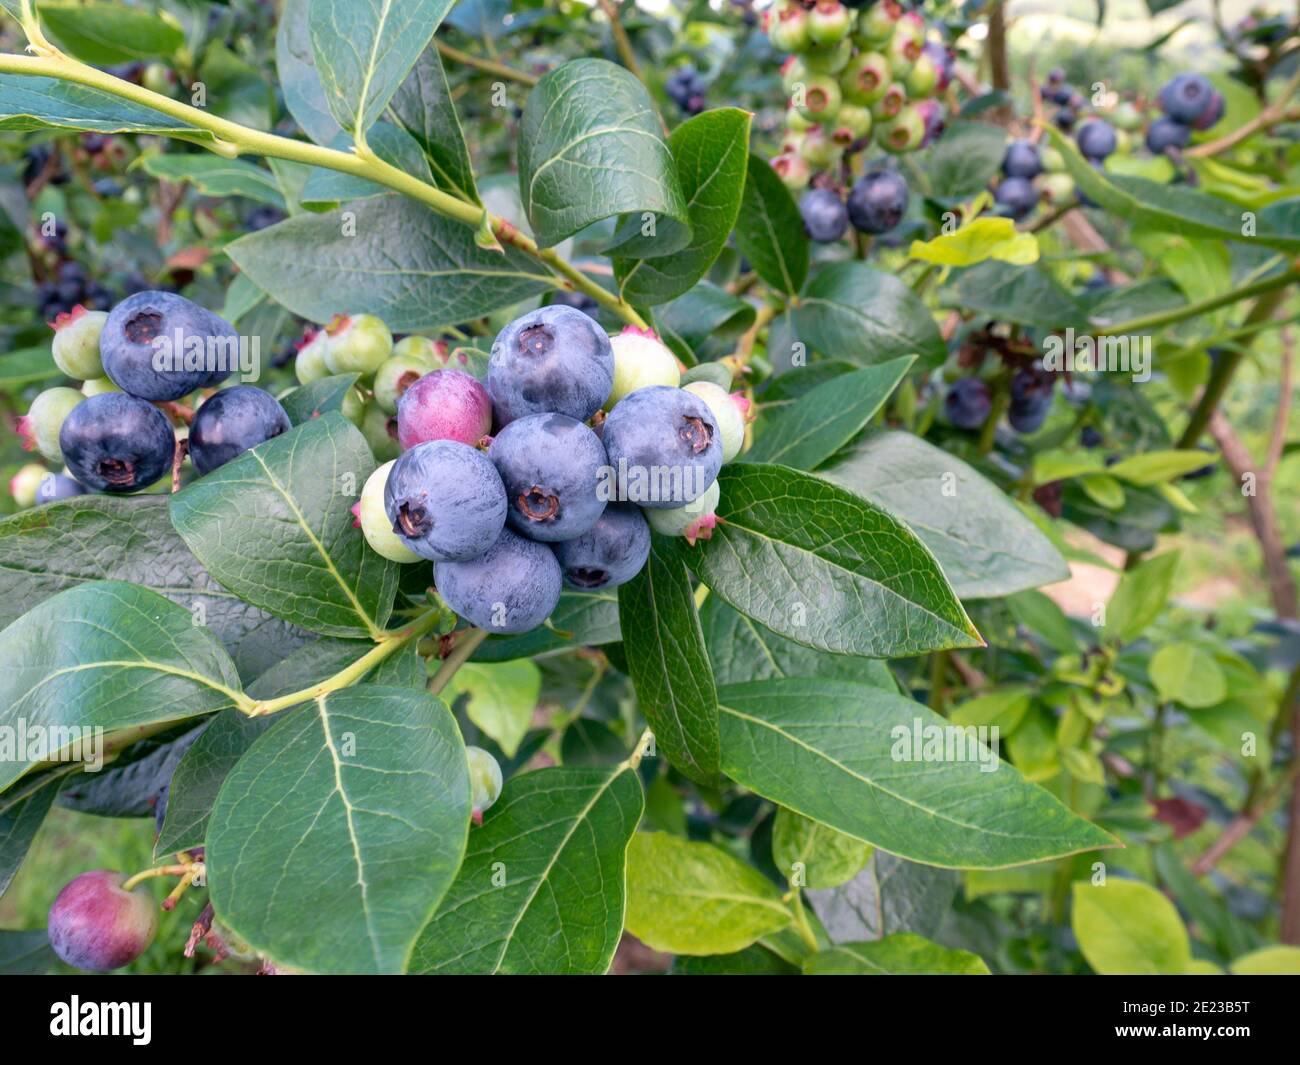 Blueberry ripe purple and green berries at the plantation. Dusky blue wax coating on the berries. Stock Photo